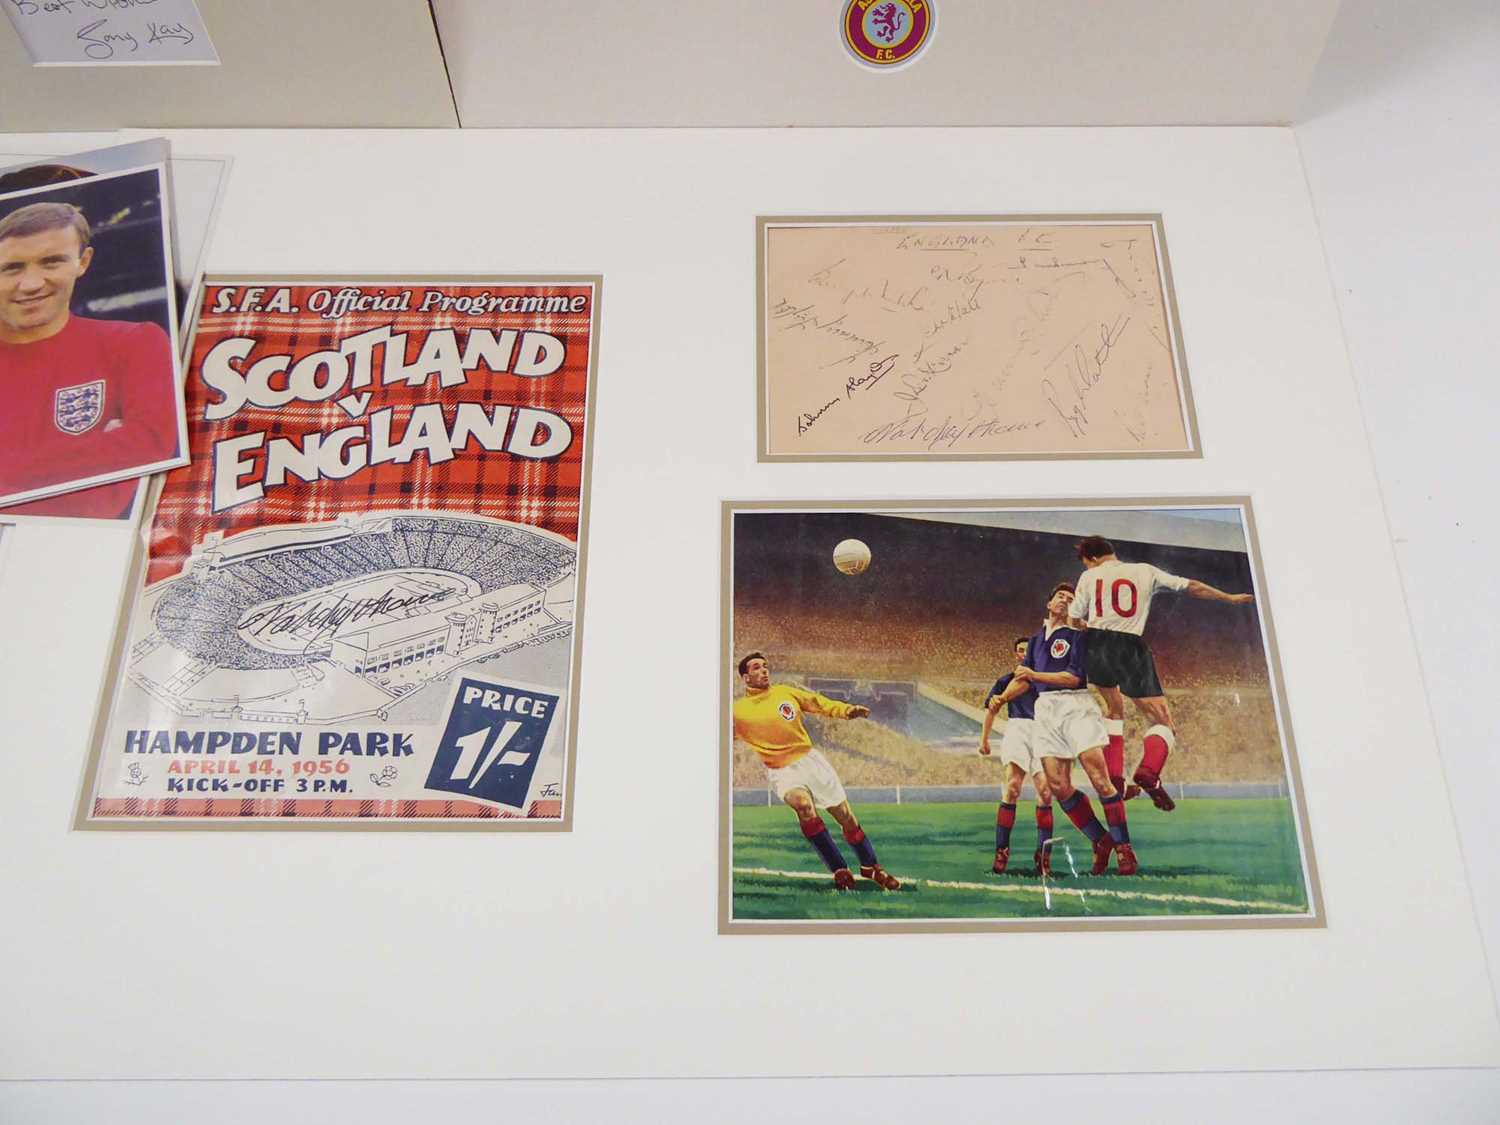 Miscellaneous collection of Football Memorabilia including Photographs and Autographs, 1930s - - Image 3 of 8